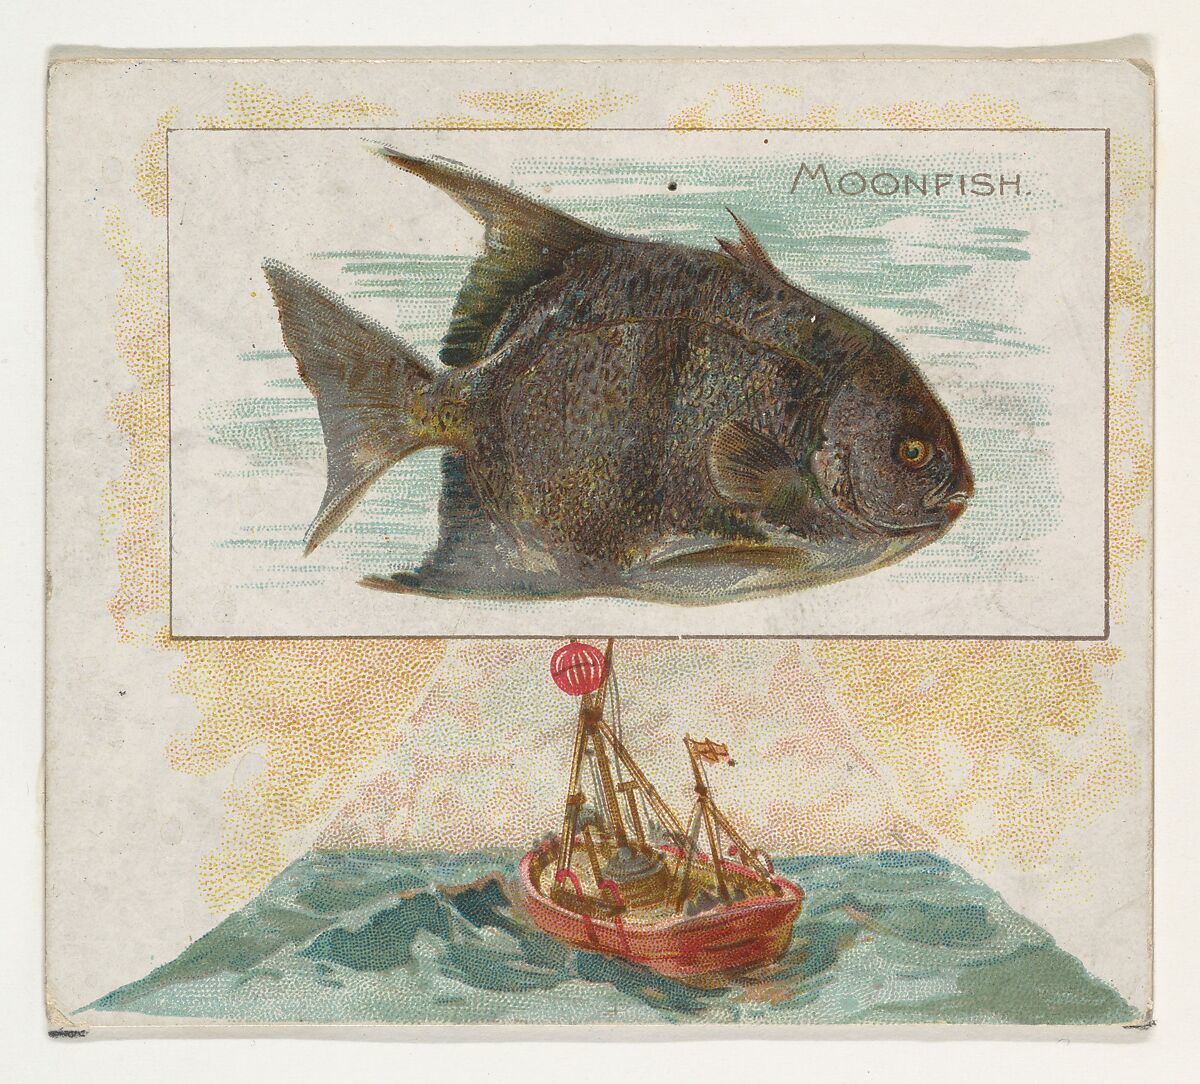 Moonfish, from Fish from American Waters series (N39) for Allen & Ginter Cigarettes, Issued by Allen &amp; Ginter (American, Richmond, Virginia), Commercial color lithograph 